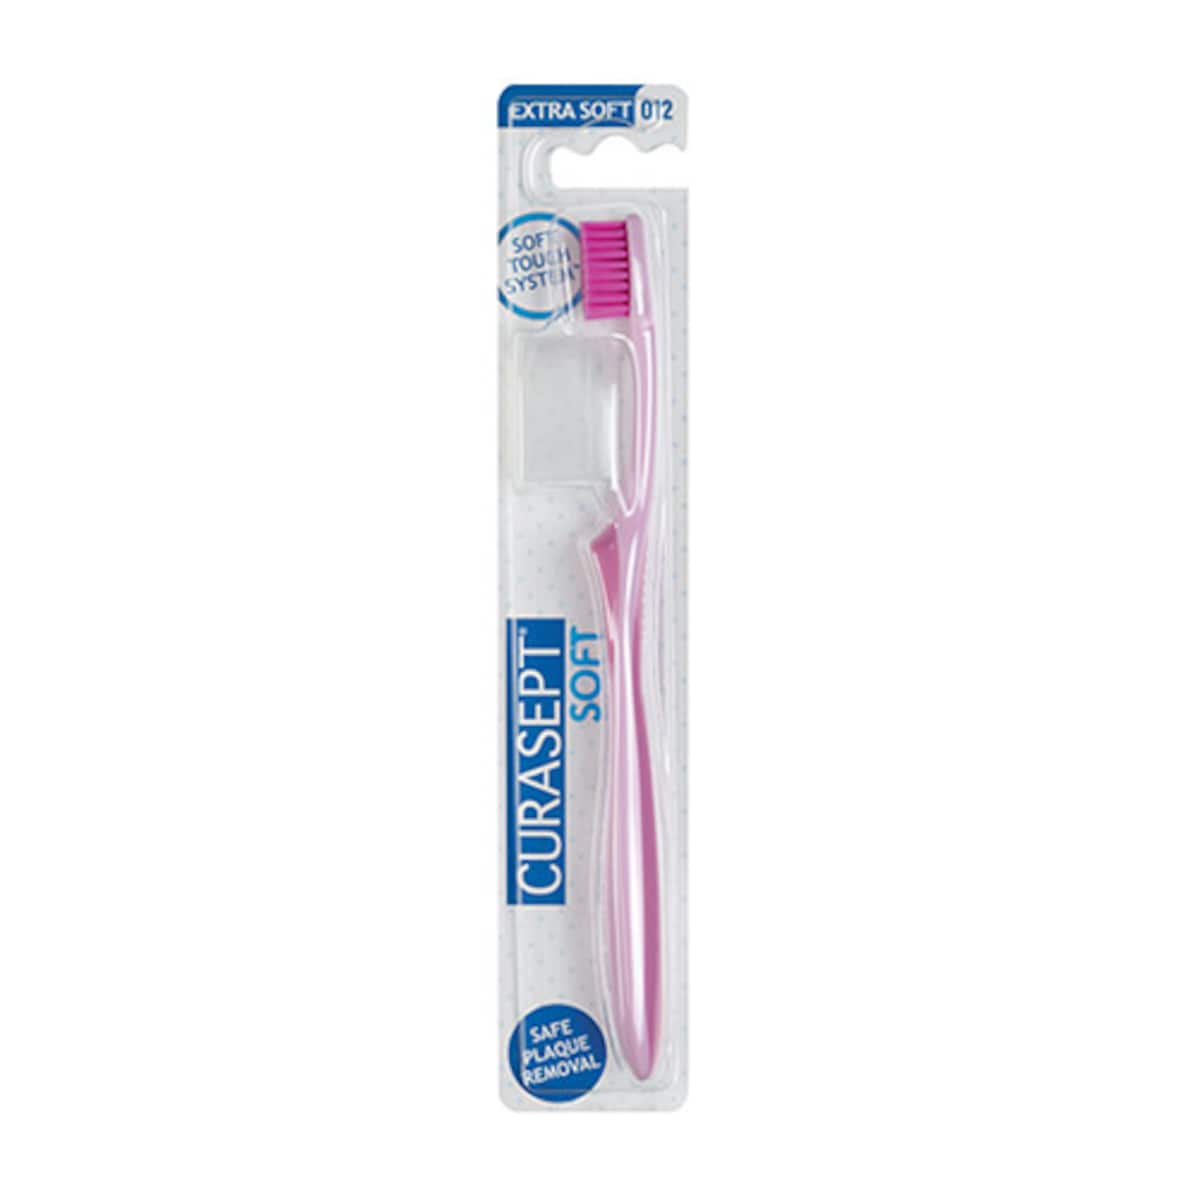 Curasept Softline Extra Soft 012 Toothbrush 1 Pack (Colours selected at random)